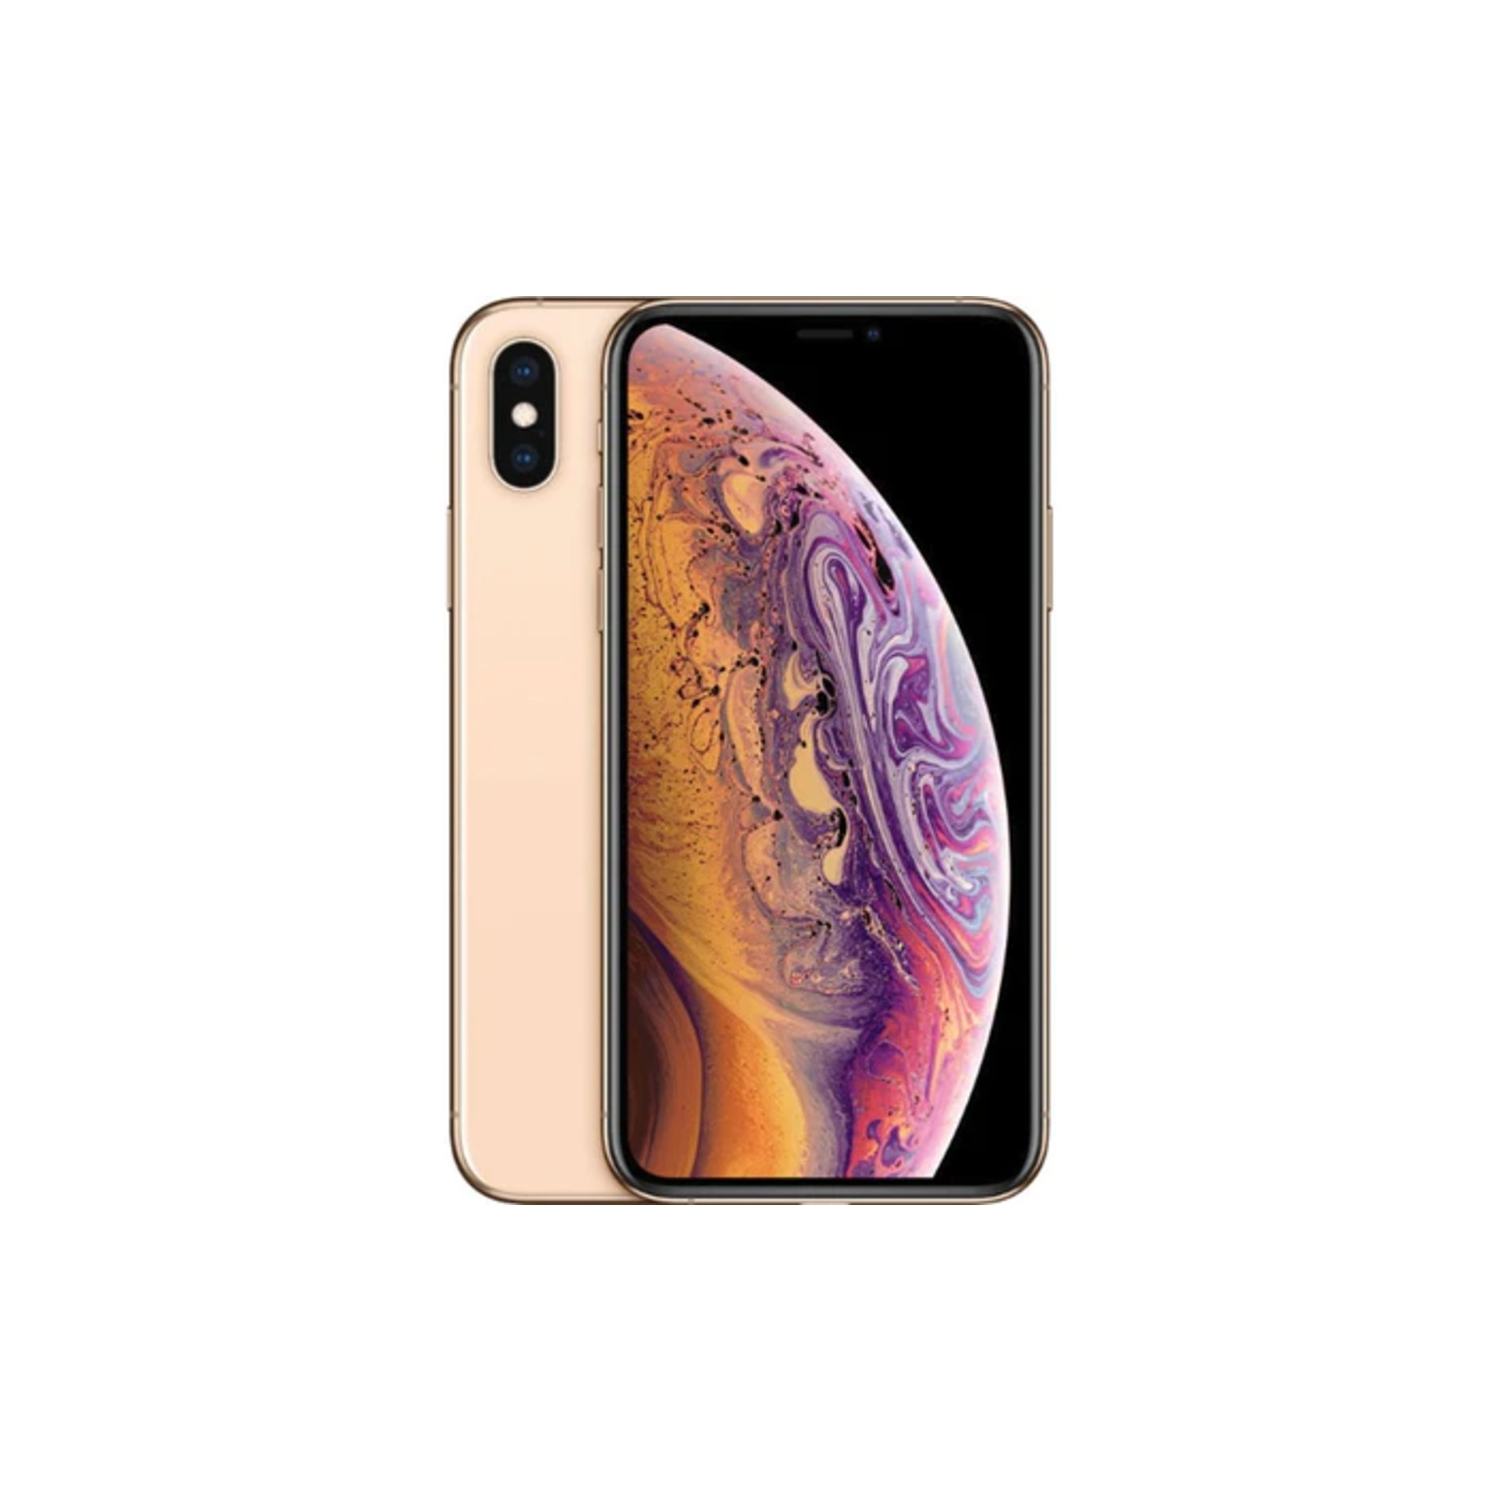 Refurbished (Excellent) - Apple iPhone XS Max 256GB Smartphone - Gold - Unlocked